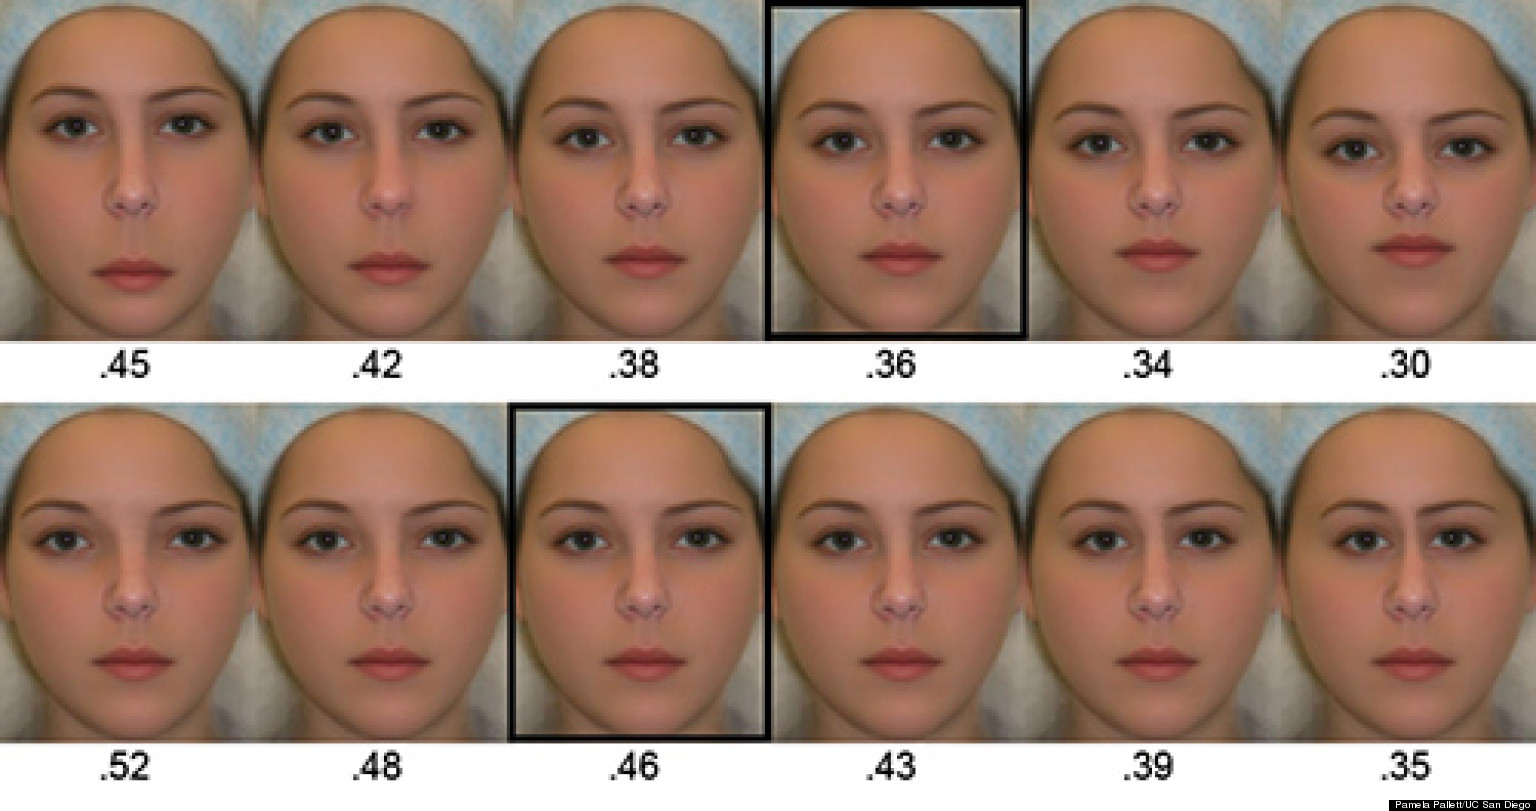 Science Of Beauty 4 Physical Traits That Help Define Female Facial